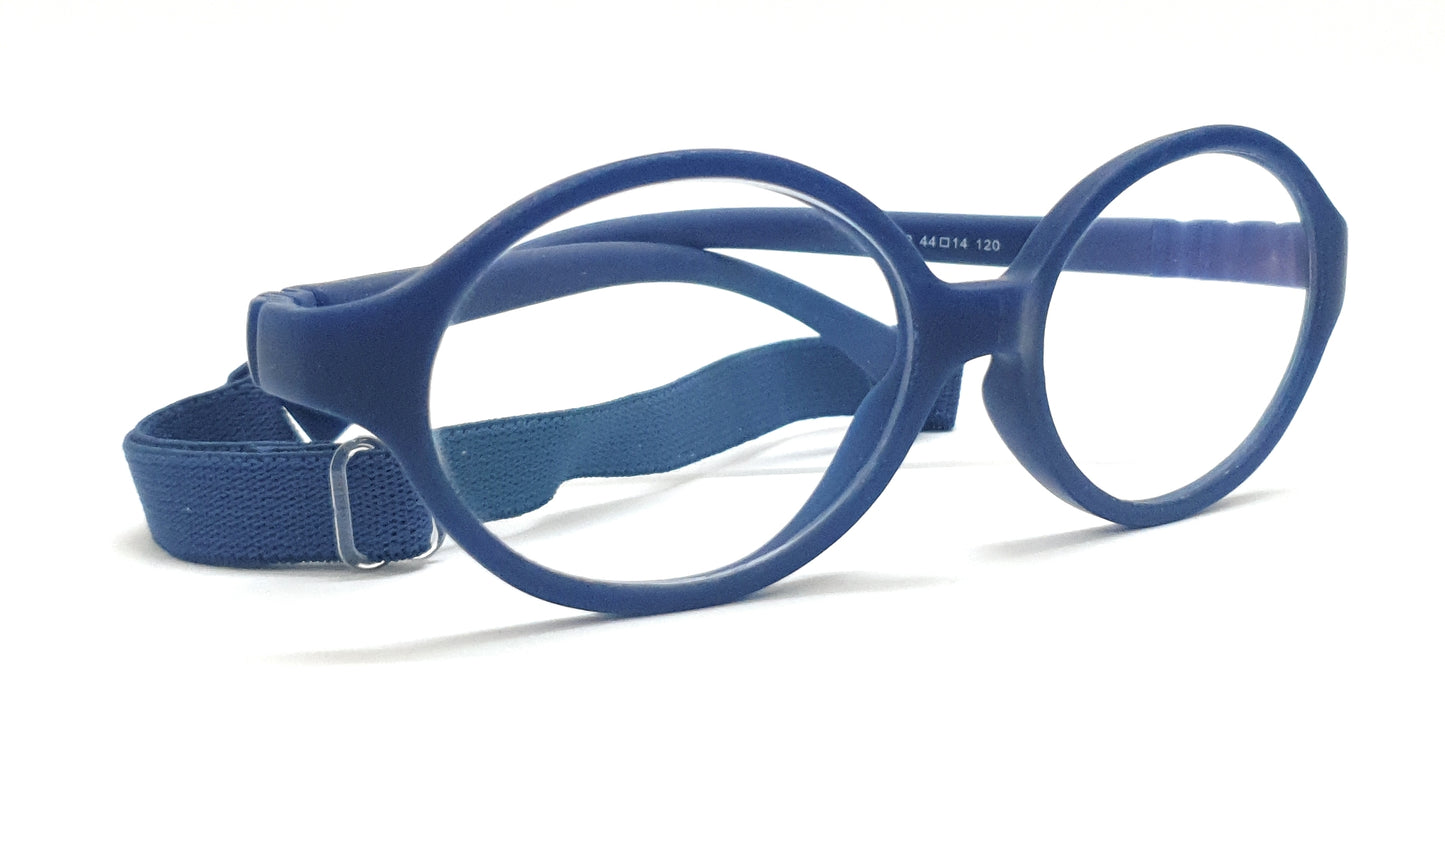 Affaires Blue Ray Block glasses Frames for Kids, Flexible, Bendable, No Screws, Glasses with anti-reflection | BC-278 (Dark Blue)